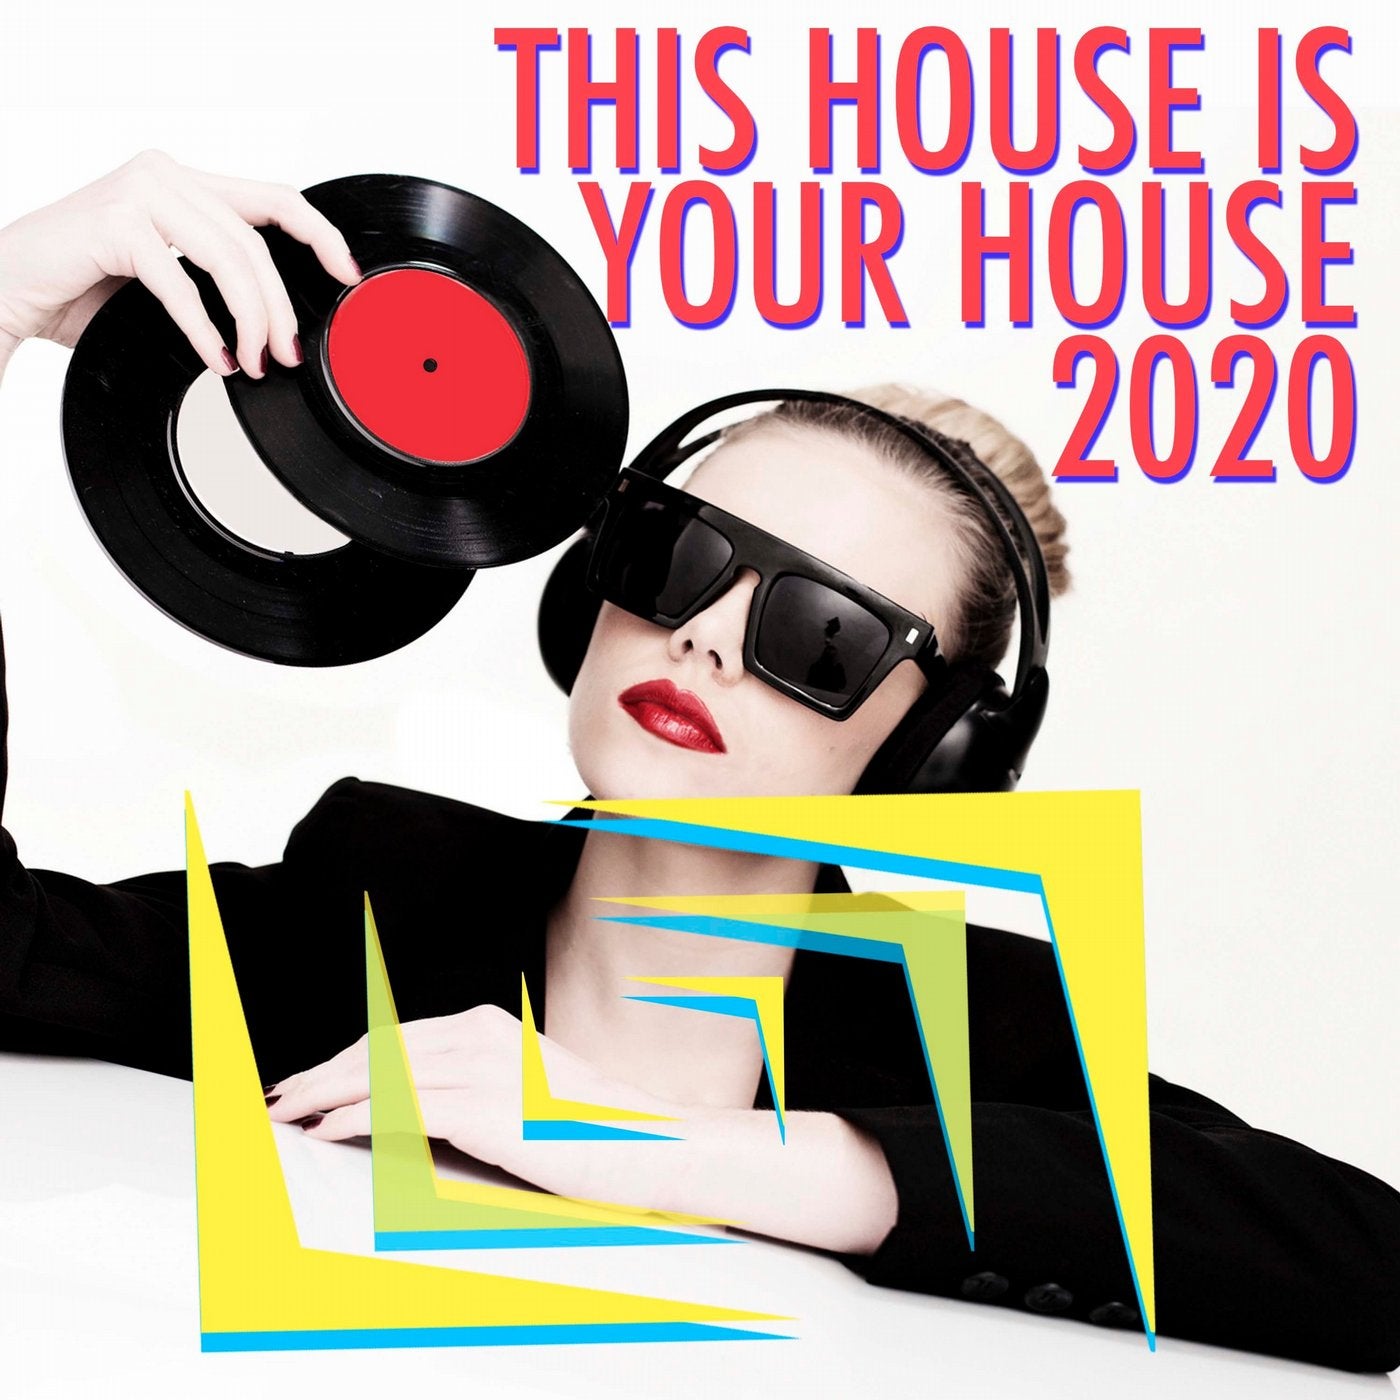 This House Is Your House 2020